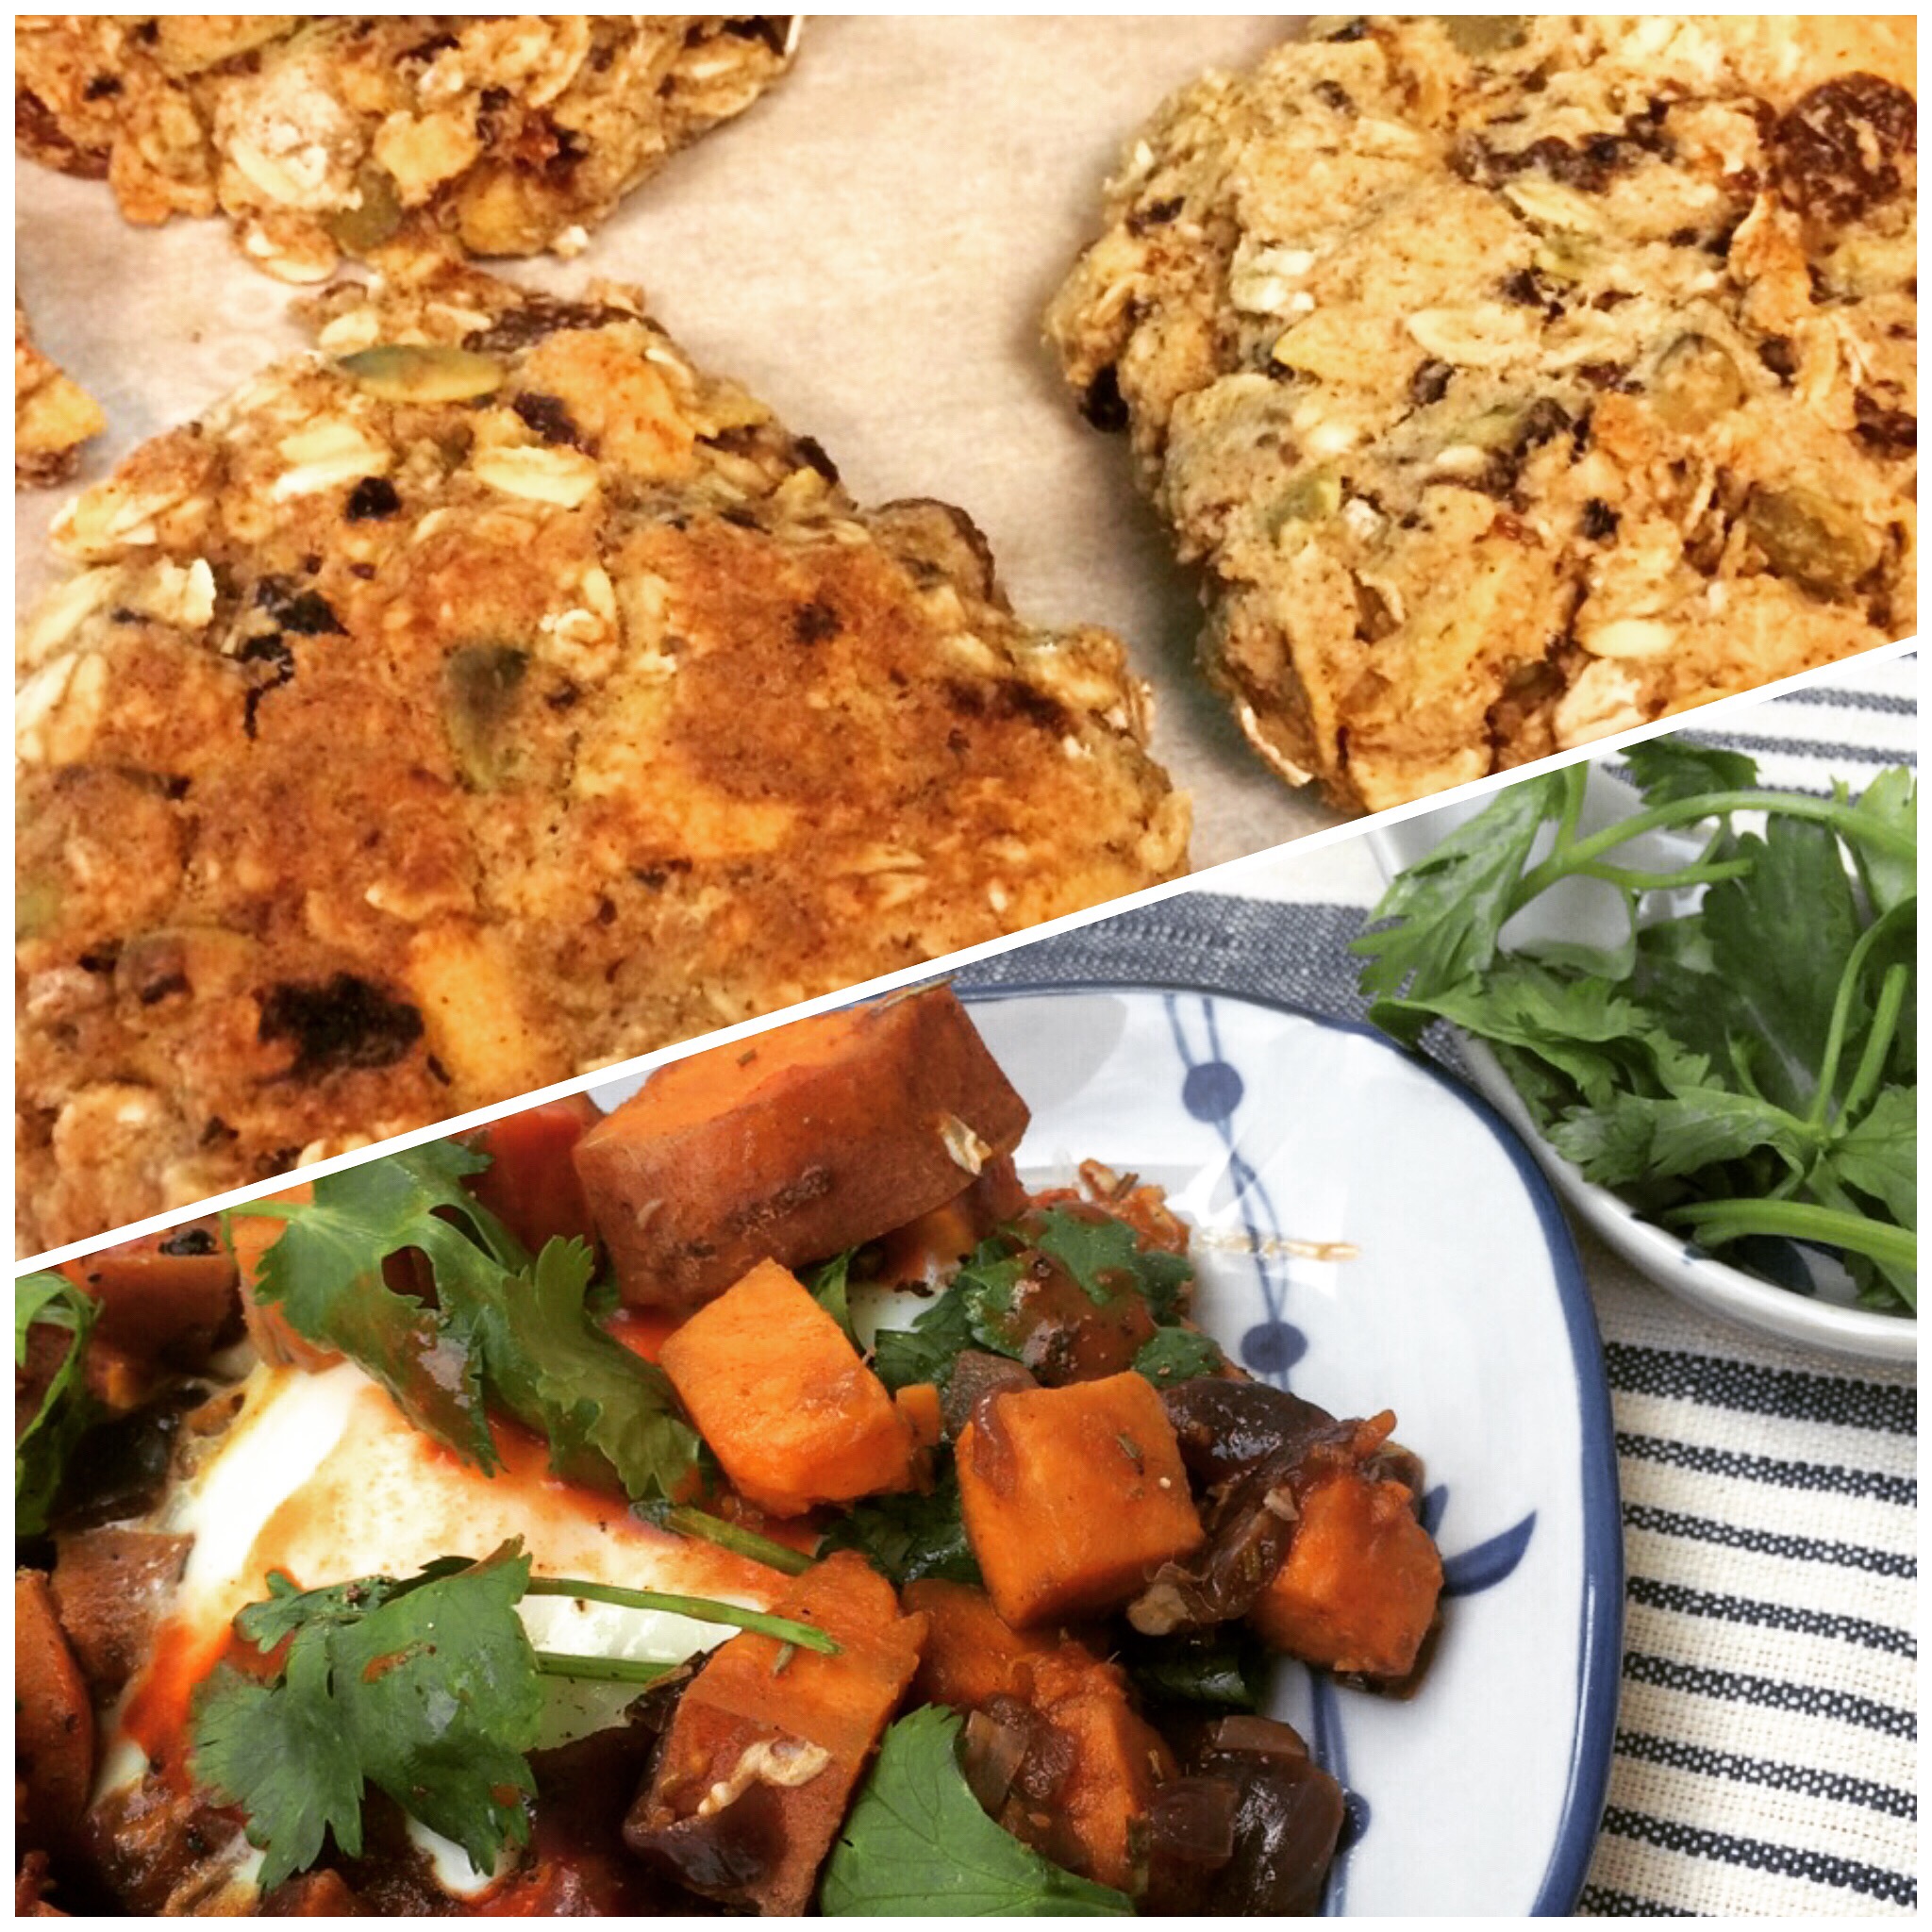 Day 18 – Review of the Sweet Potato Hash & Breakfast Bars